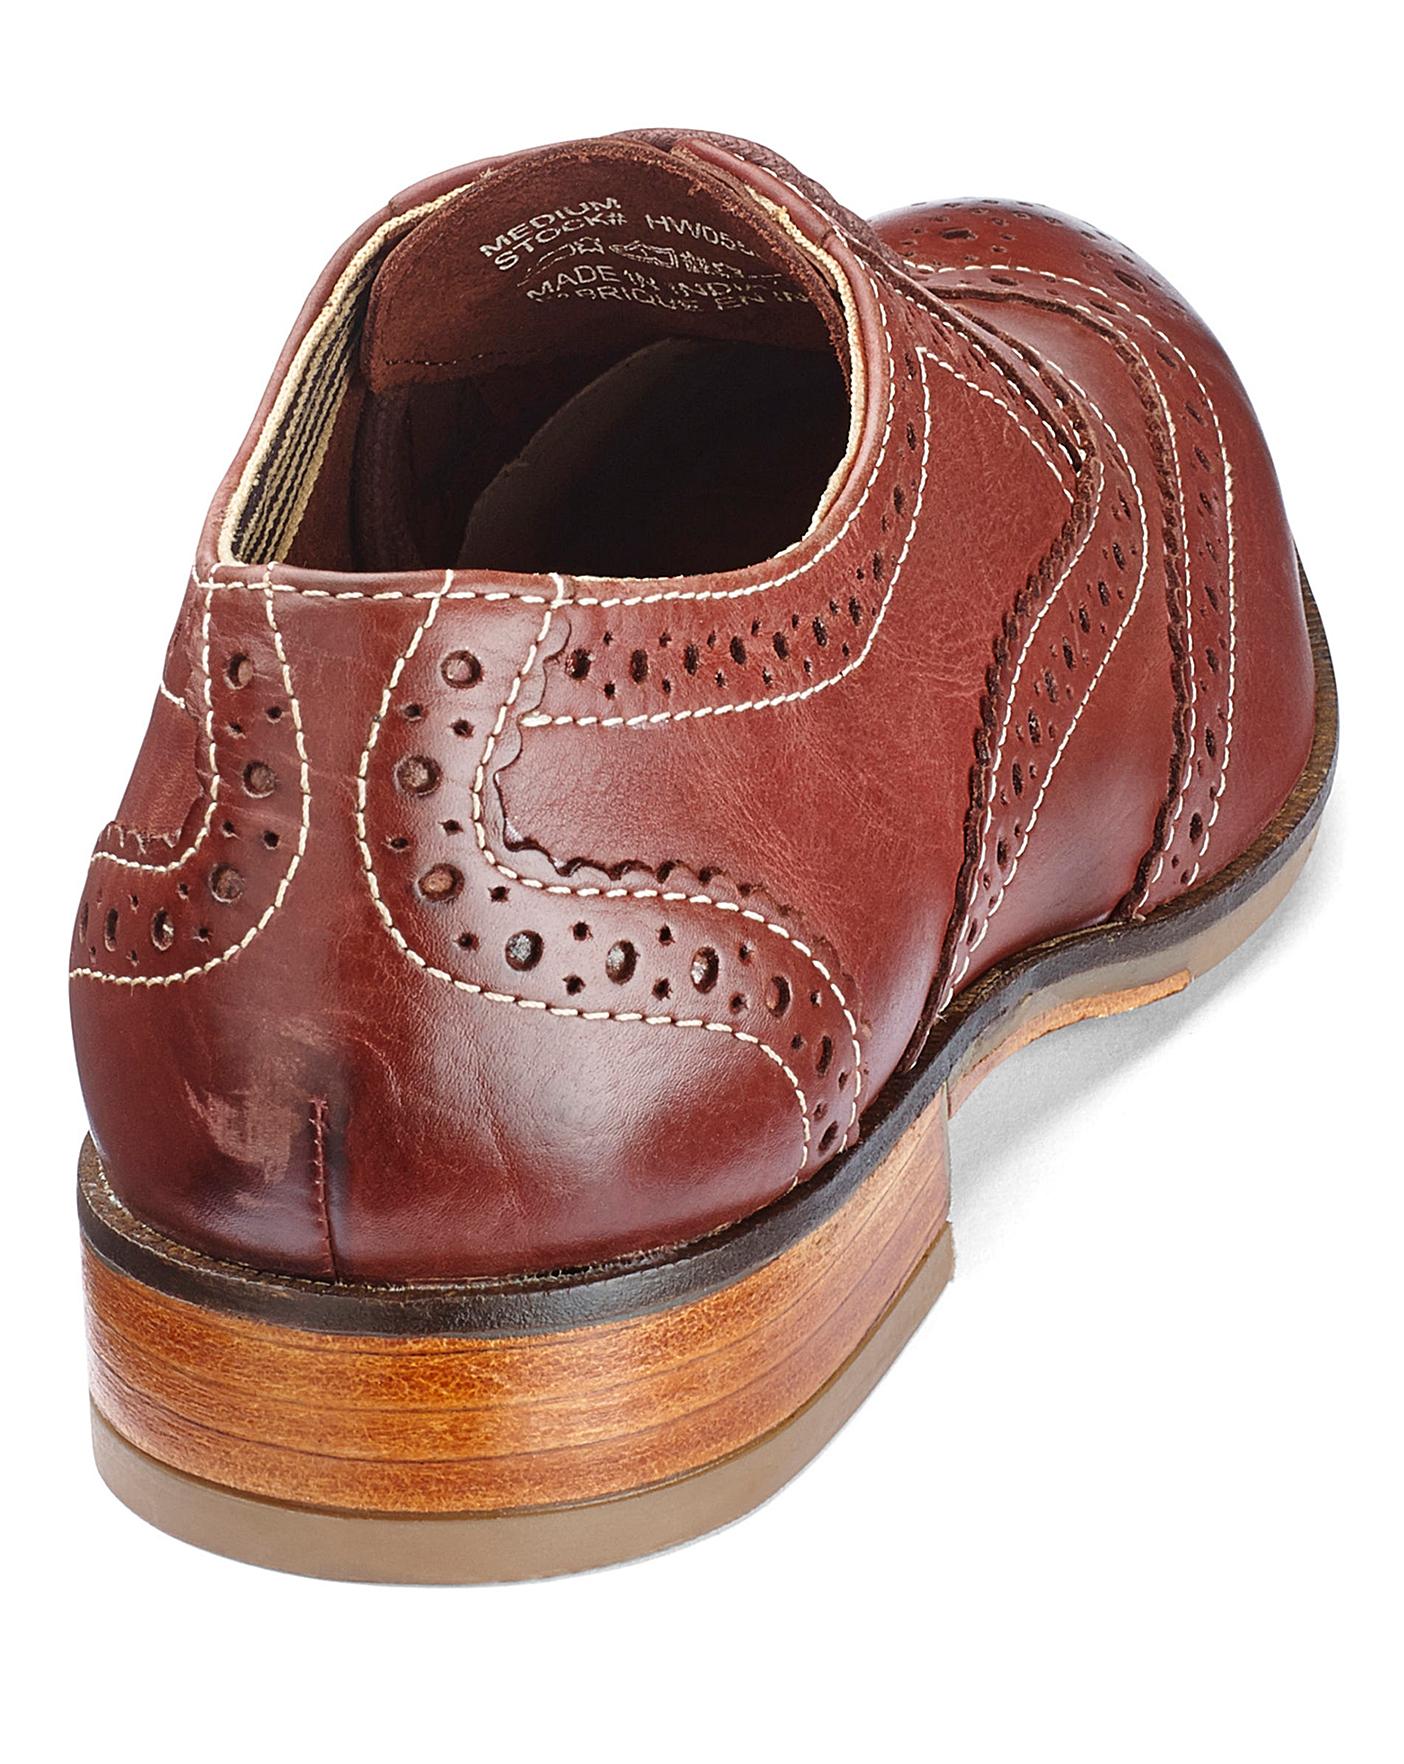 Hush Puppies Shoes D Fit | Fashion World